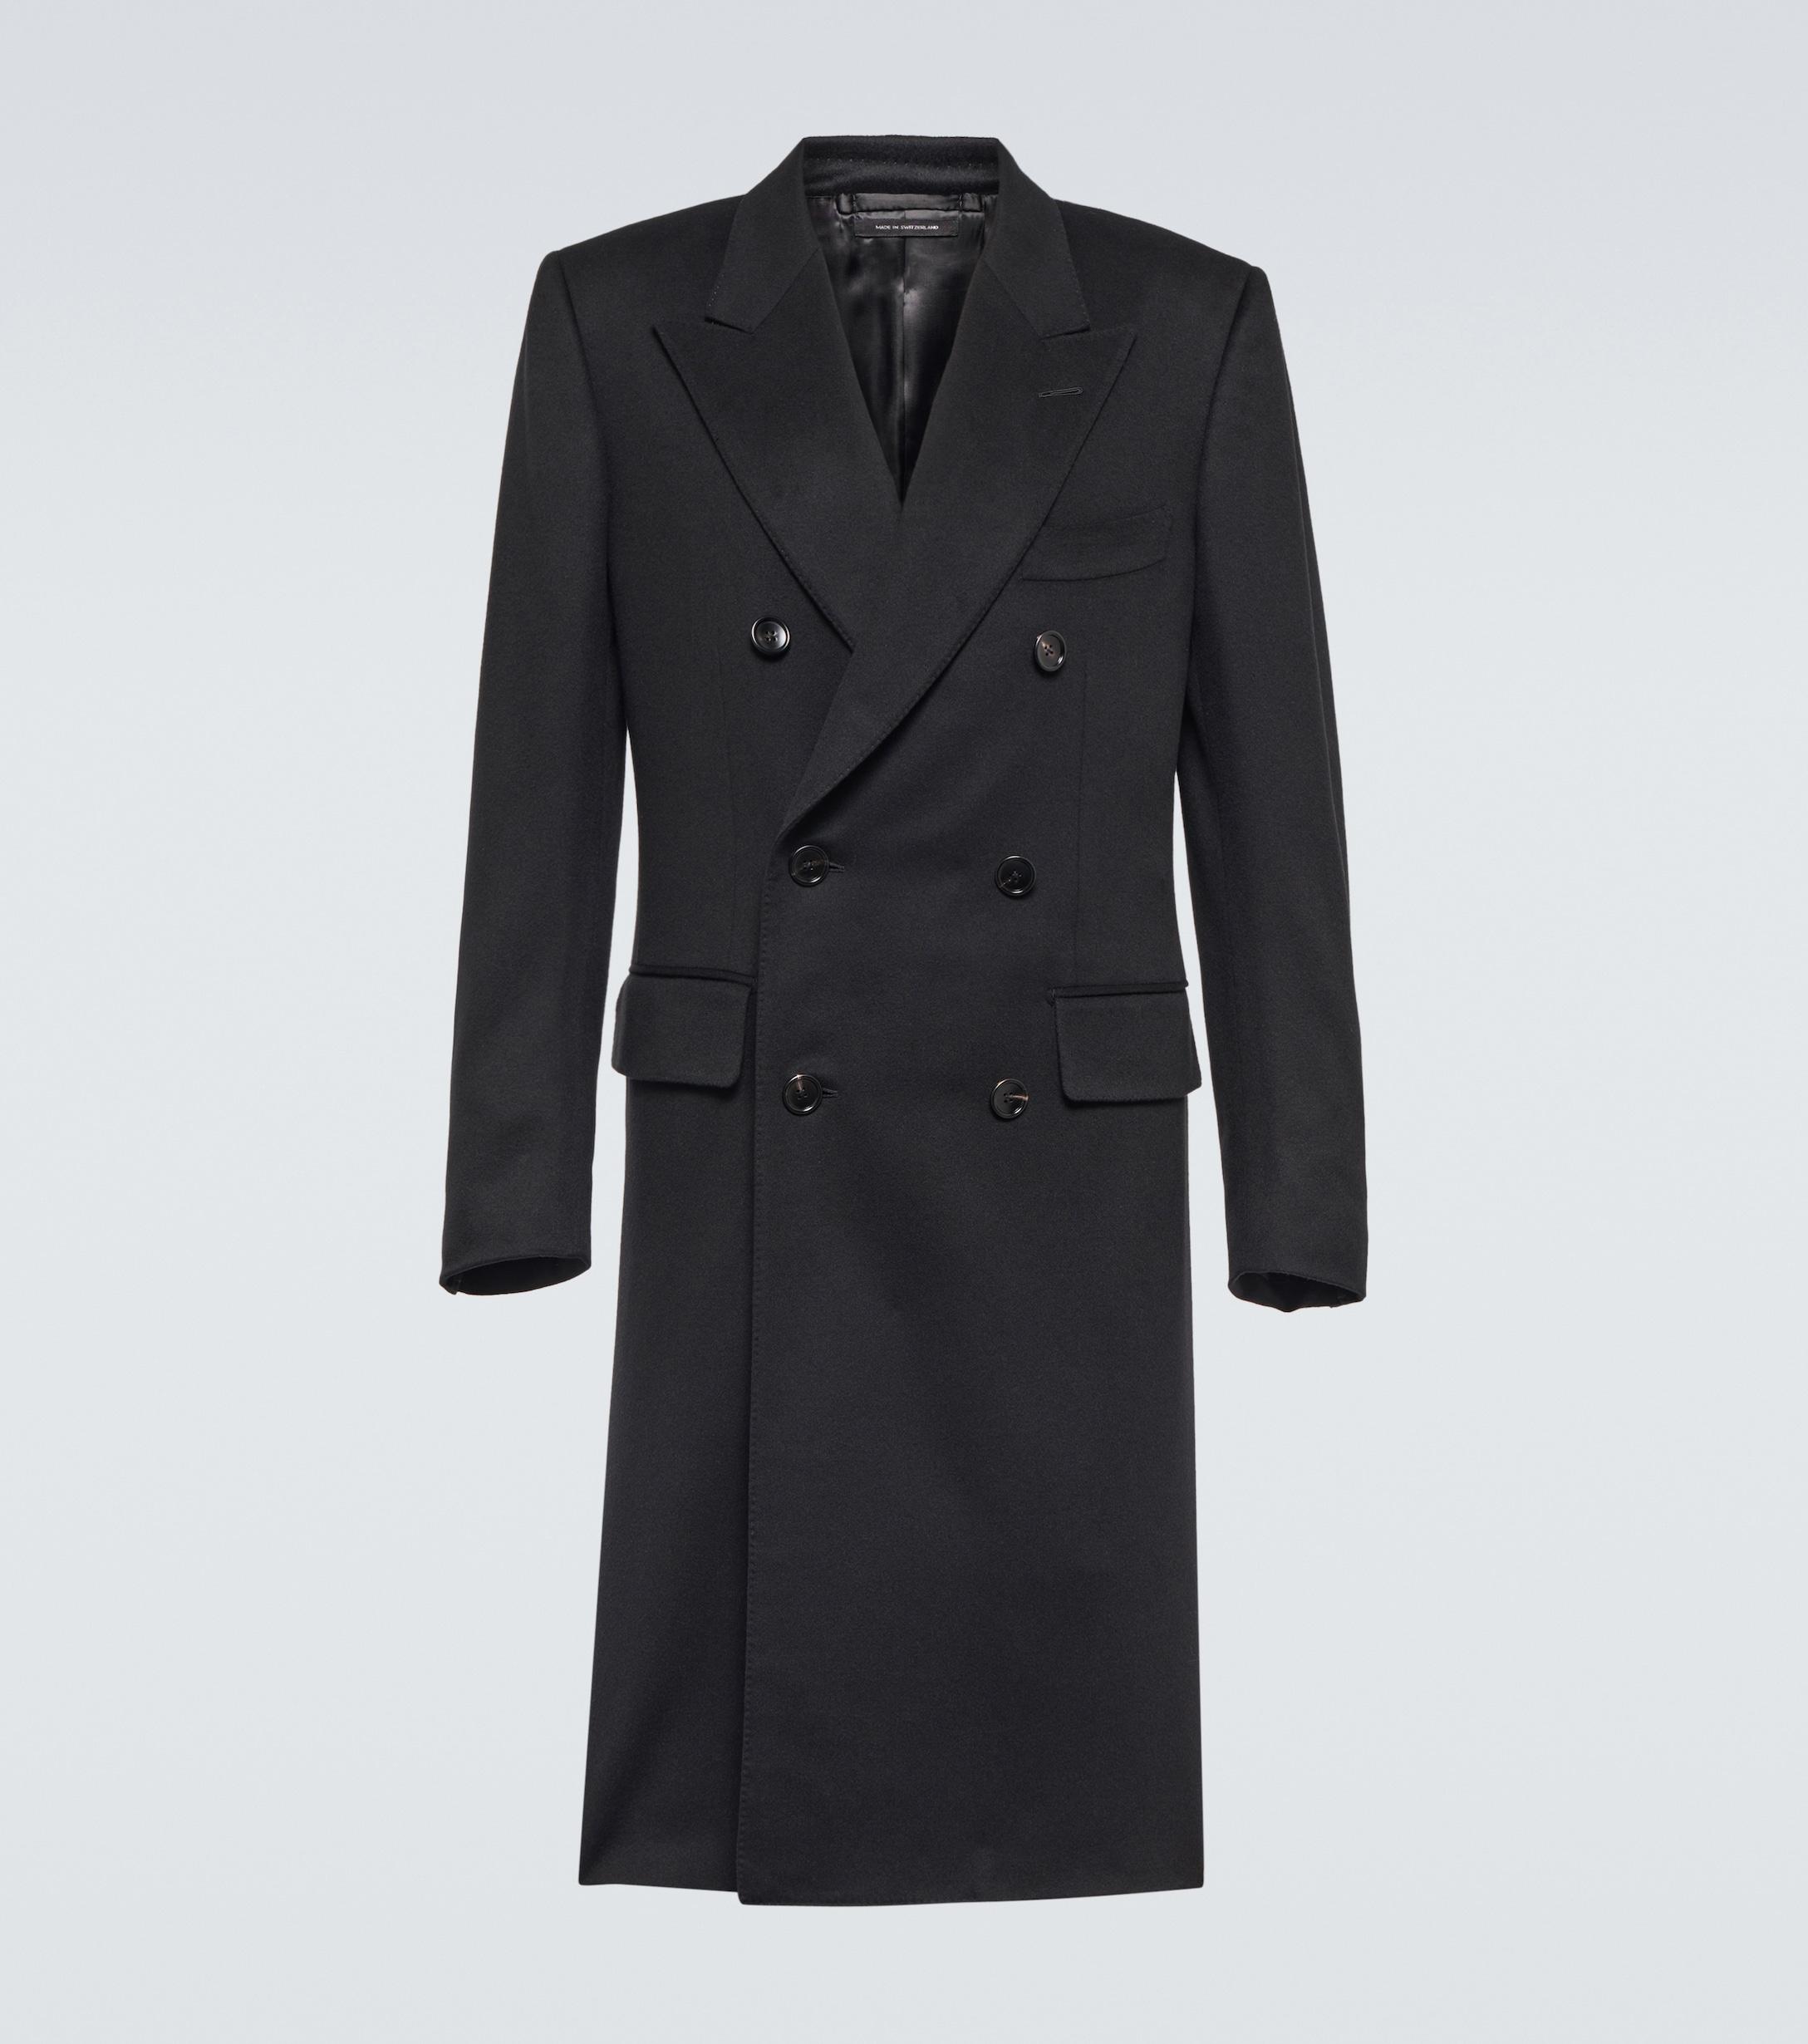 Tom Ford Double-breasted Cashmere Coat in Black for Men | Lyst